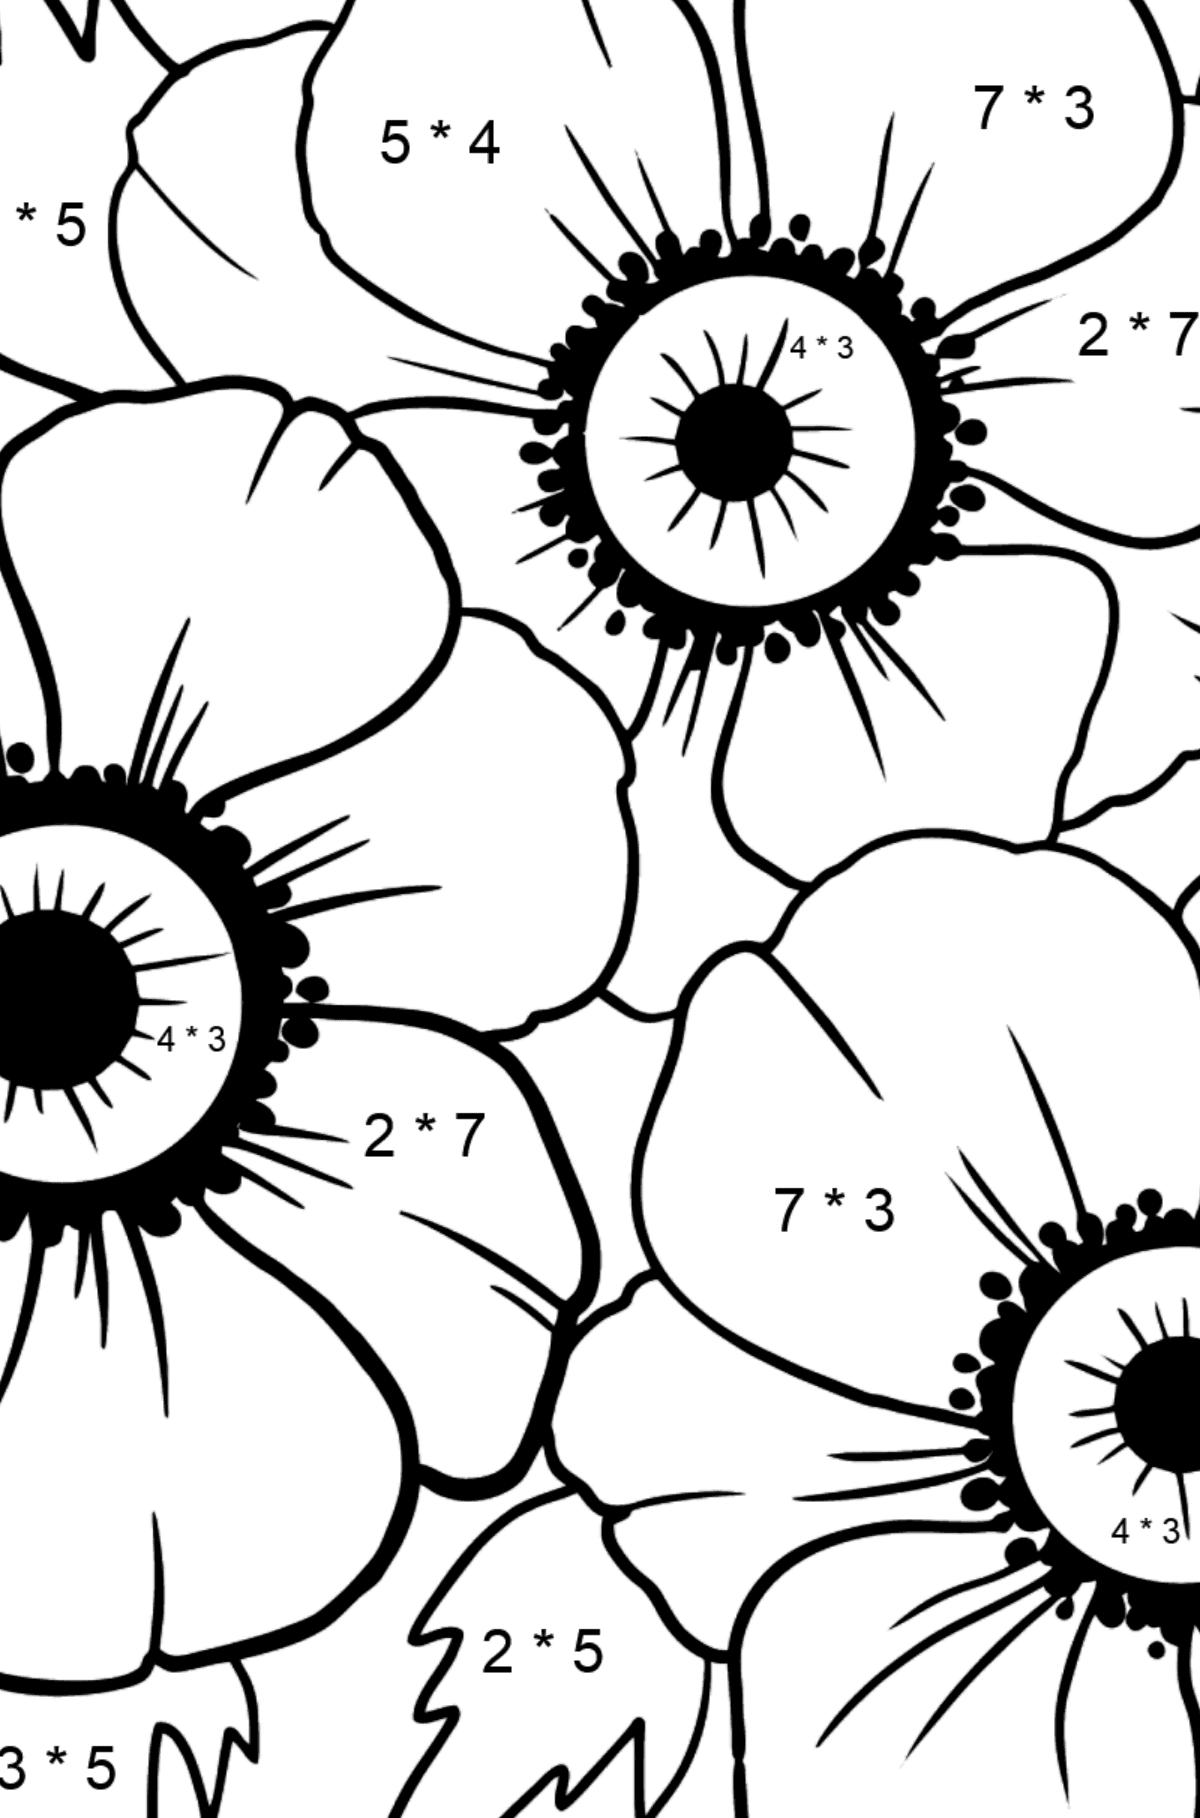 Coloring Page Anemone Mr. Fokker - Math Coloring - Multiplication for Kids